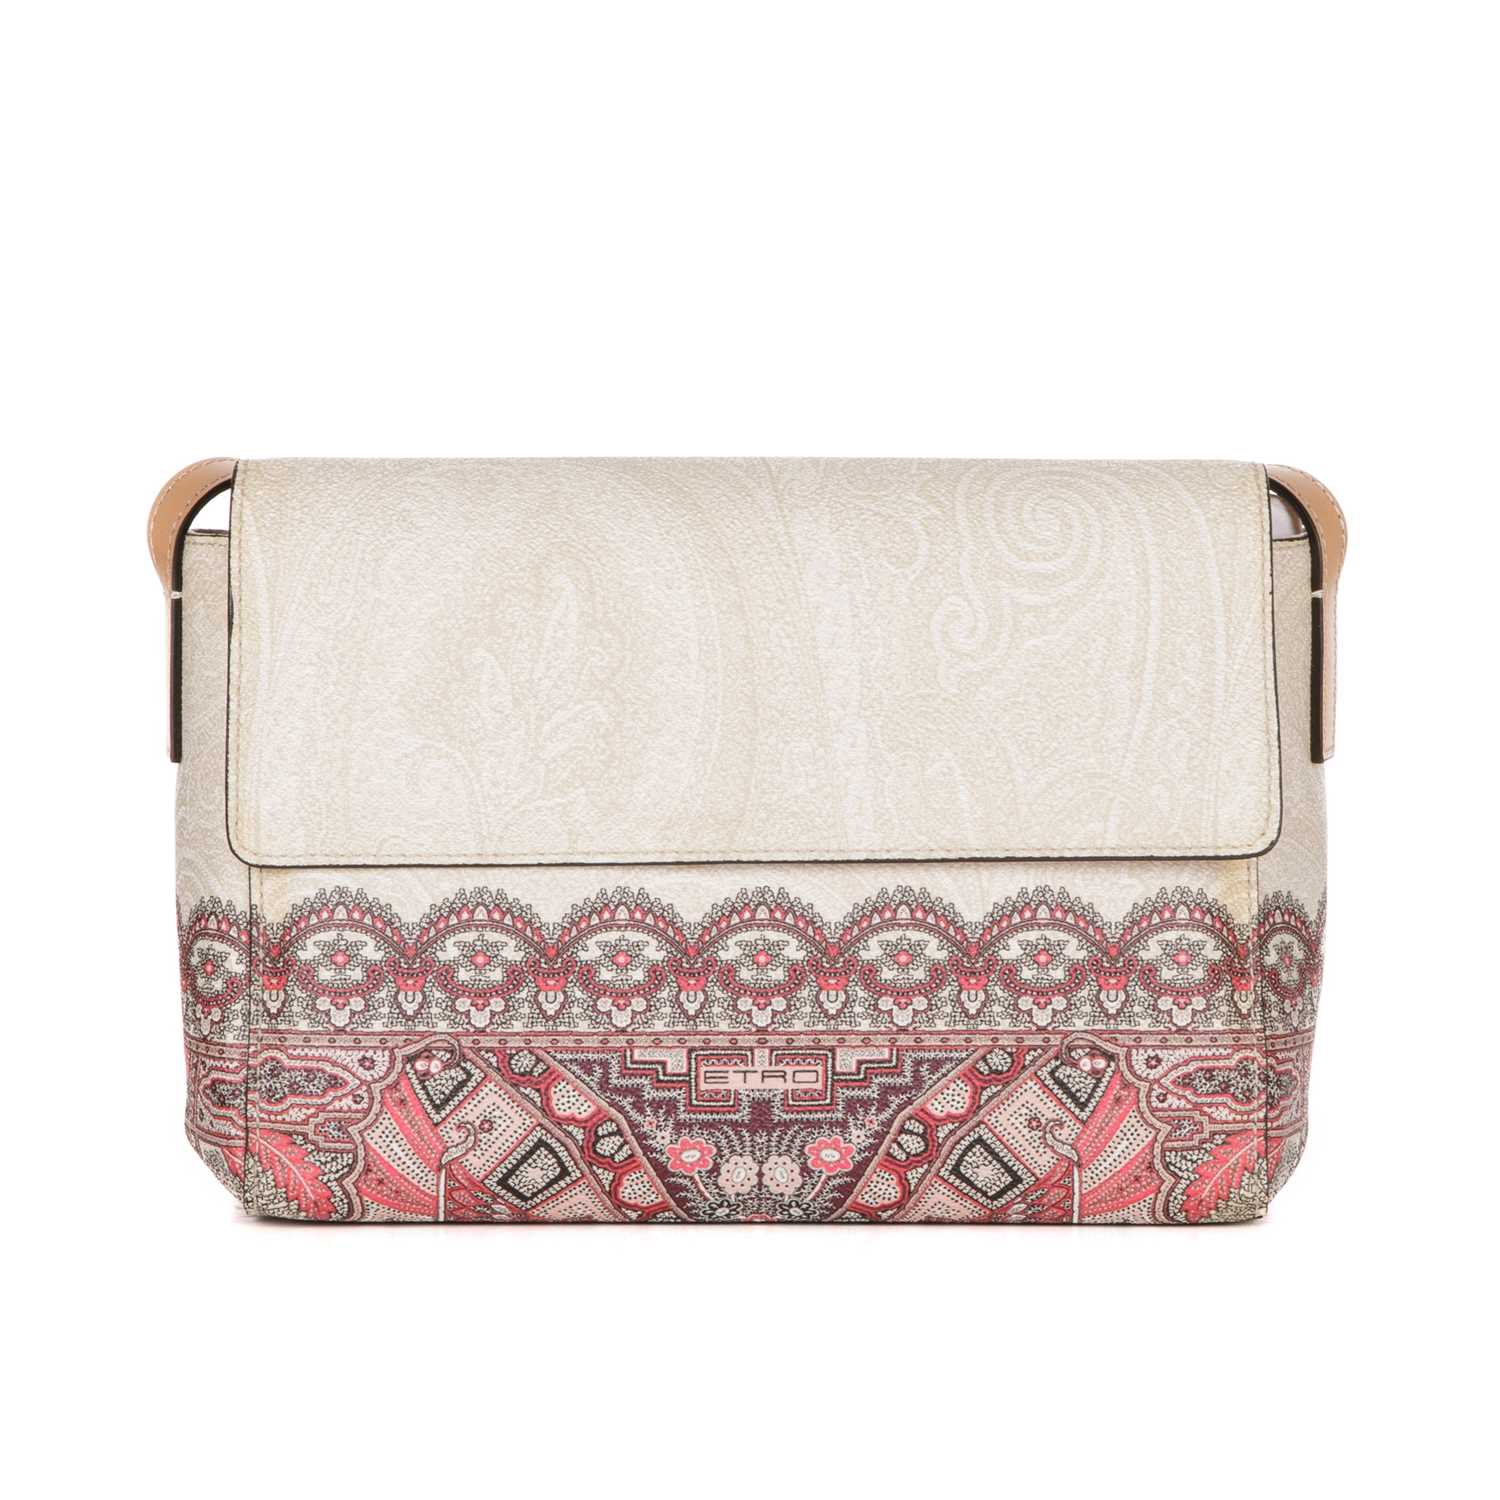 Etro, a coated canvas crossbody handbag, featuring a subtle paisley pattern to the cream exterior - Image 3 of 6